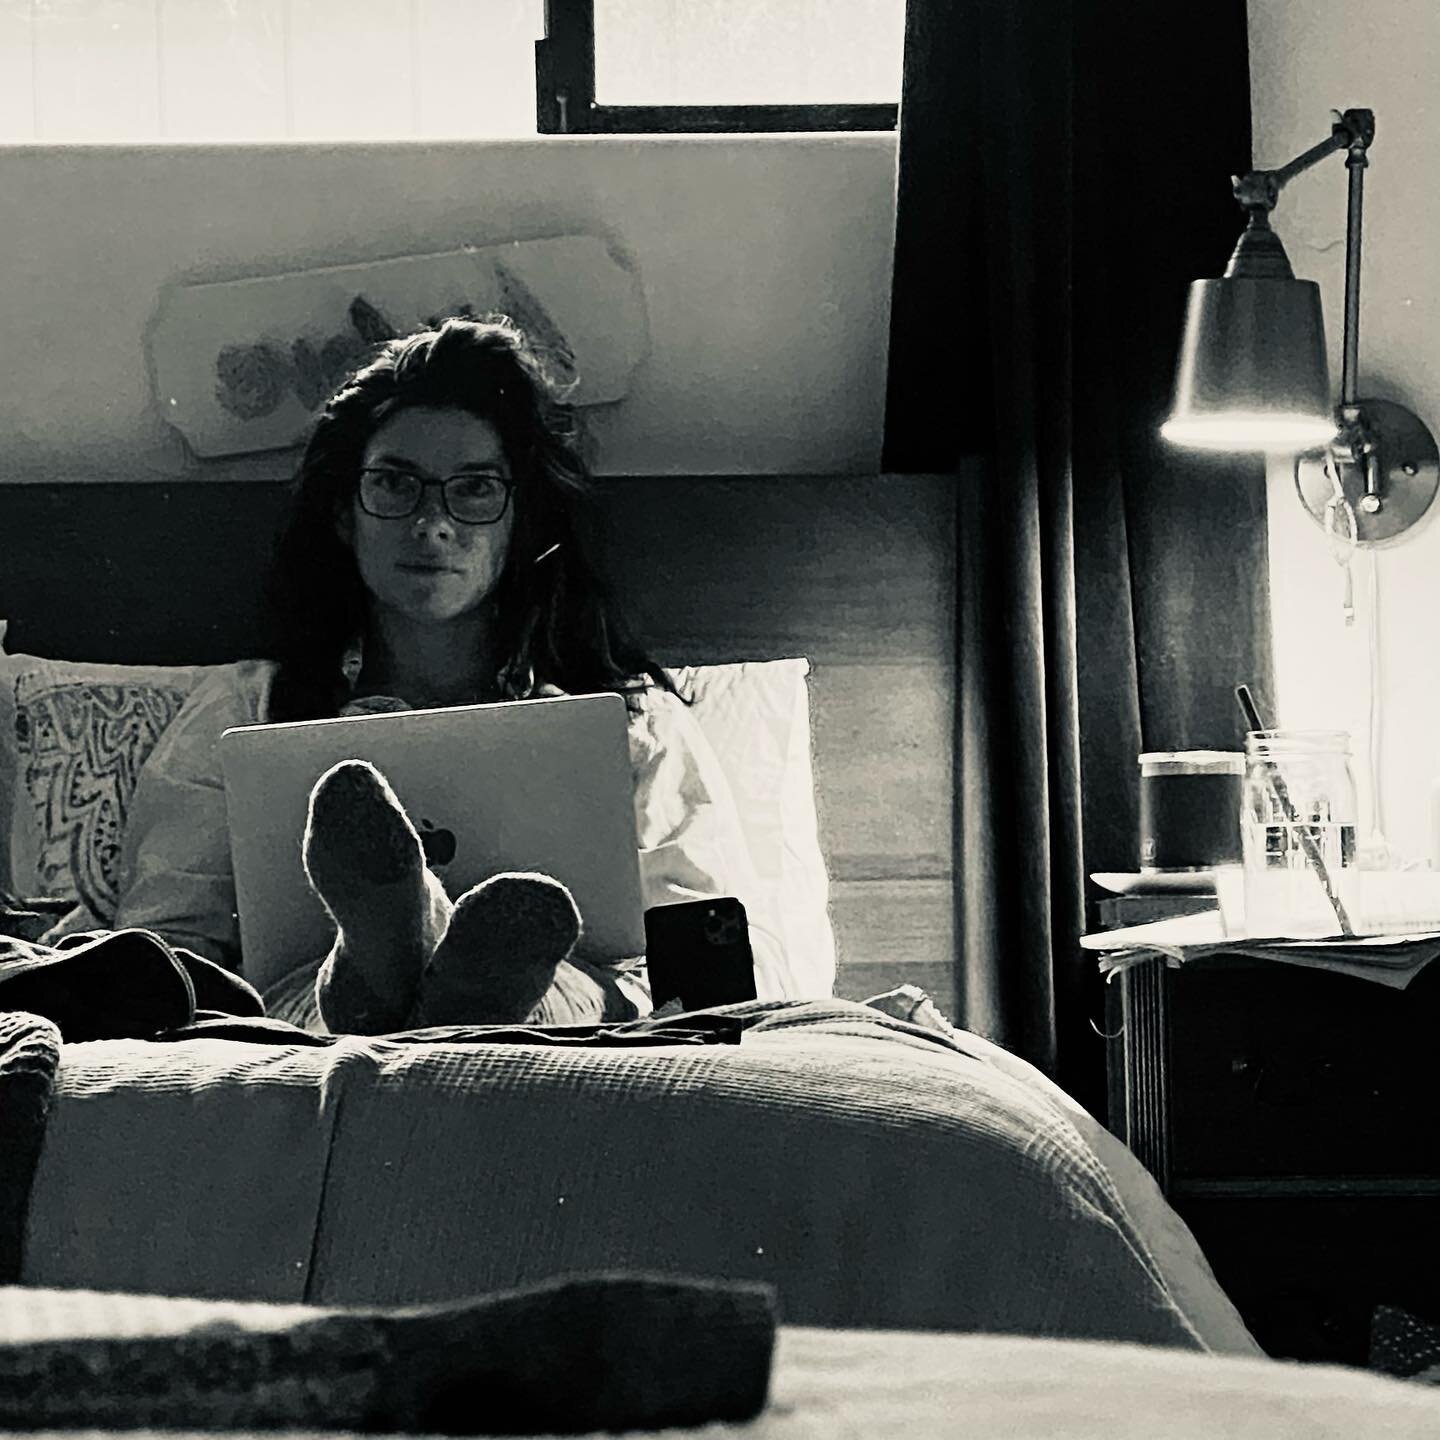 Rainy day work session. Bed office edition. Happy noveling you post Christmas folks. May it be filled with heart and fire, and may you merrily, actually, finally write the last, hard-fought word of it. 📓💪🏻